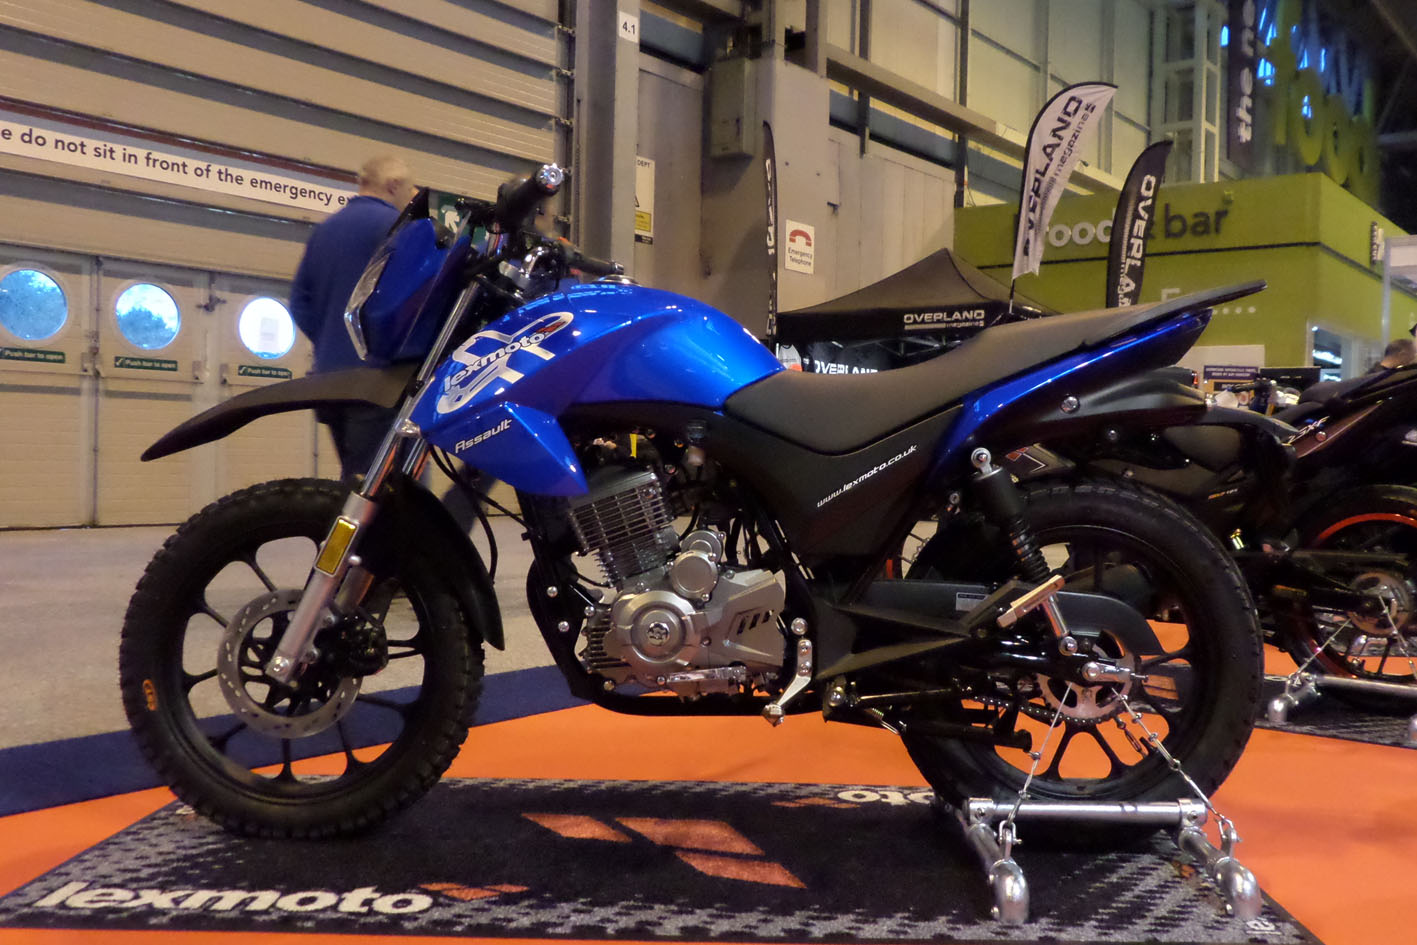 Here's a closer look at Lexmoto's 2016 range